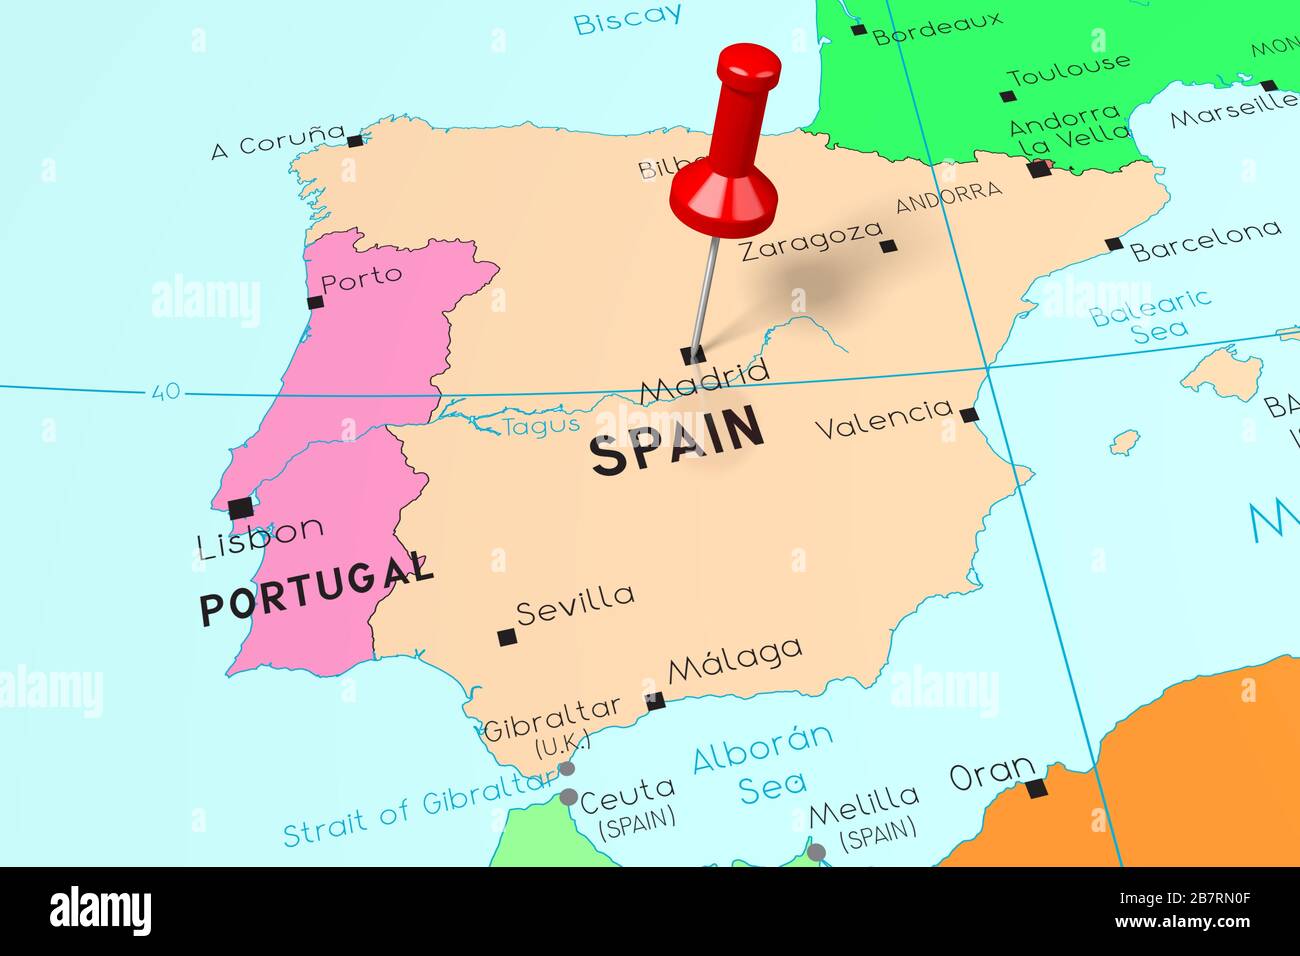 Spain Madrid Capital City Pinned On Political Map Stock Photo